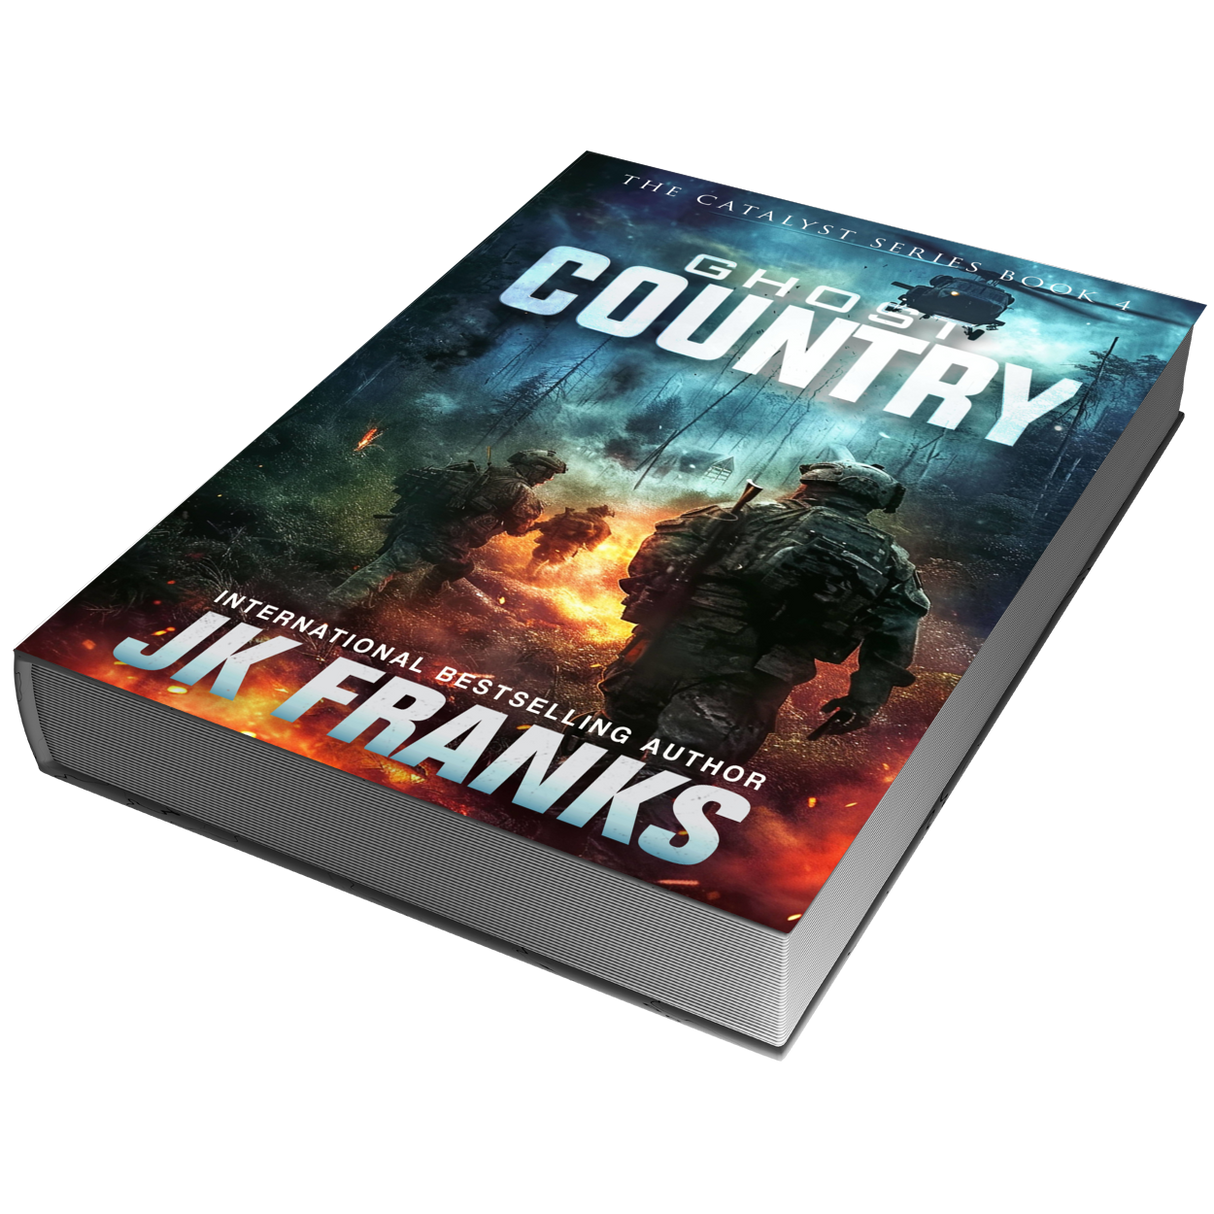 Paperback Book - Ghost Country (Book 4 The Catalyst Series)